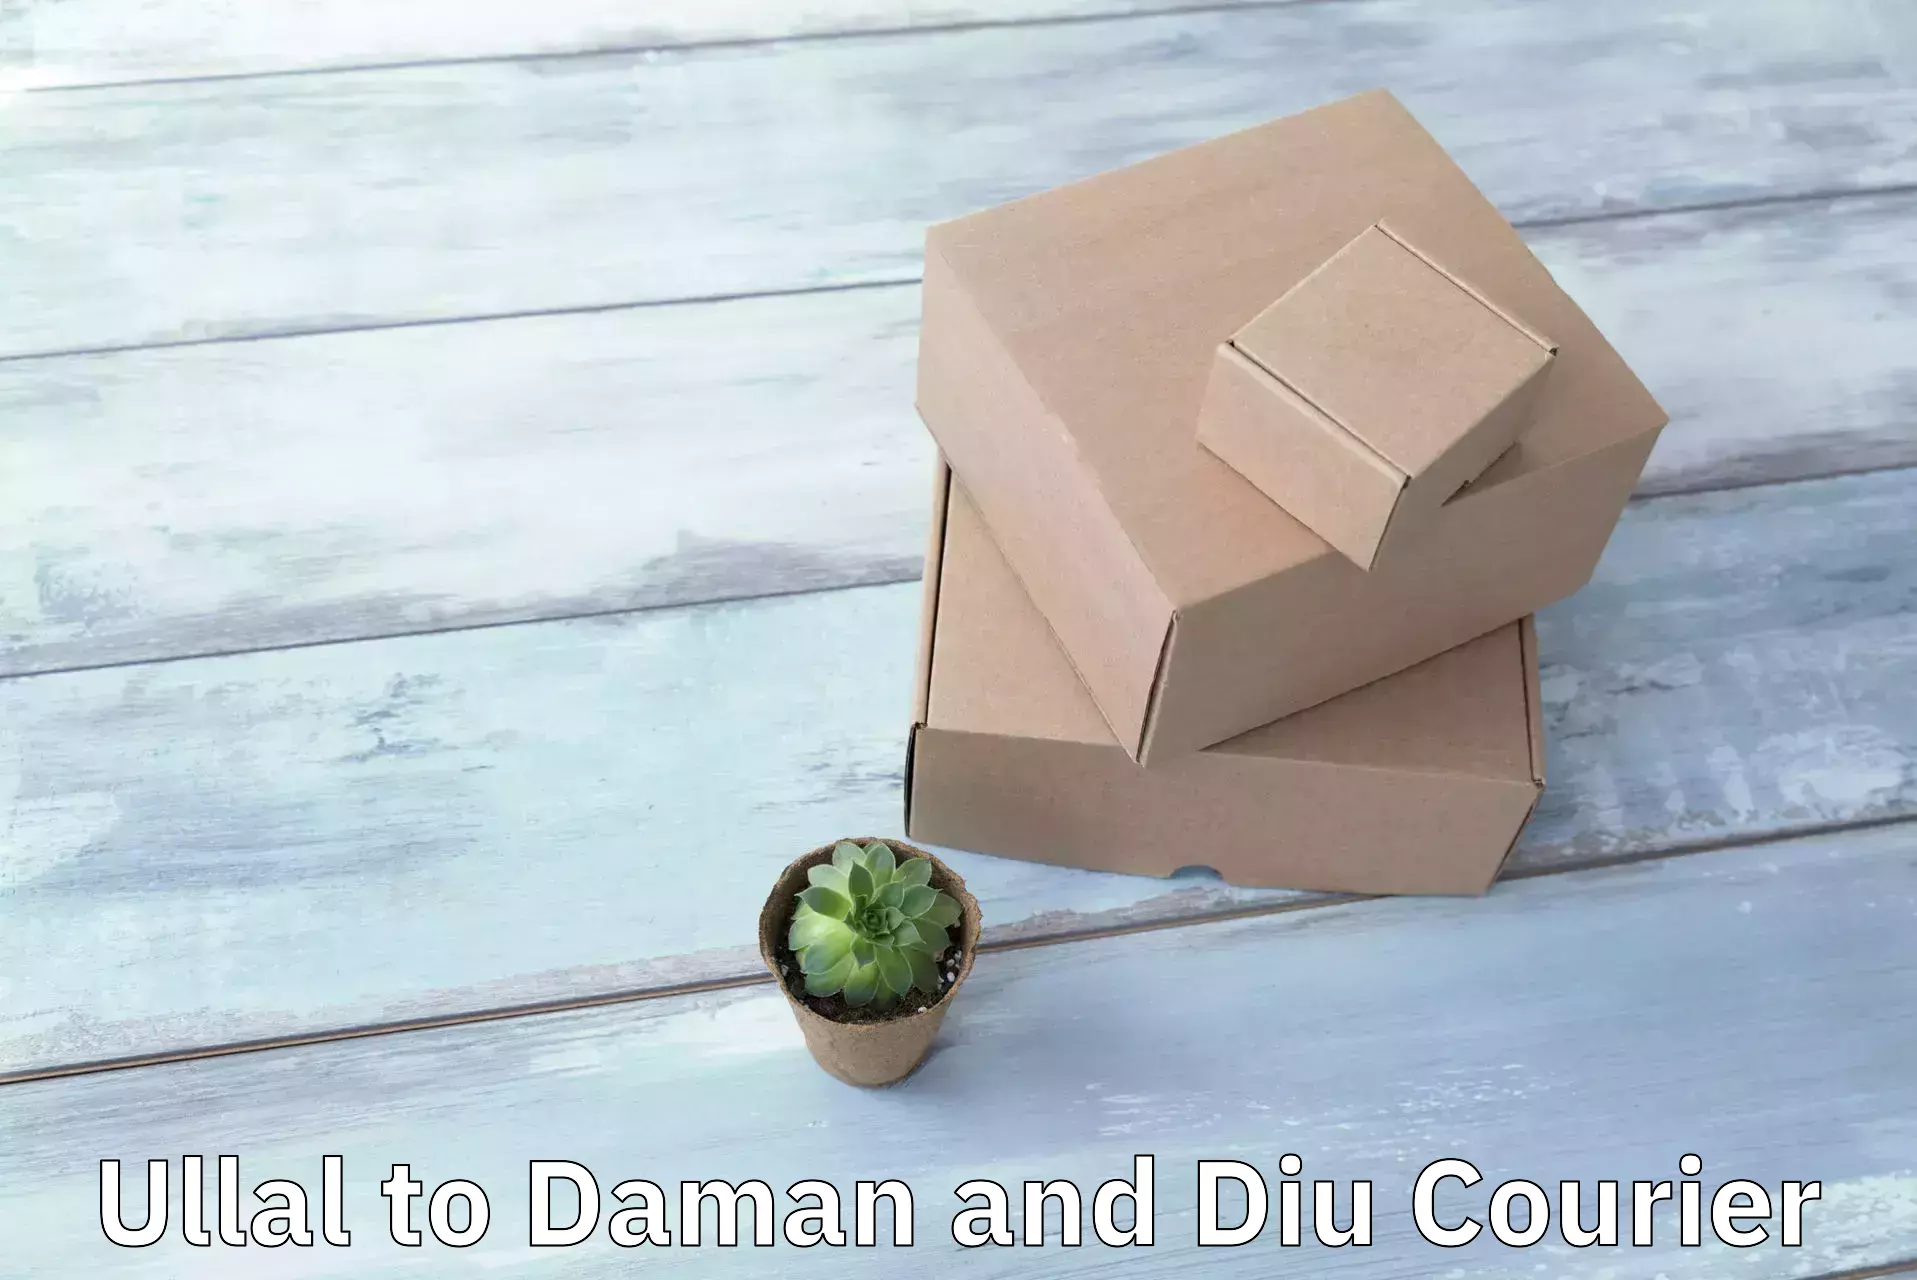 Delivery service partnership Ullal to Daman and Diu